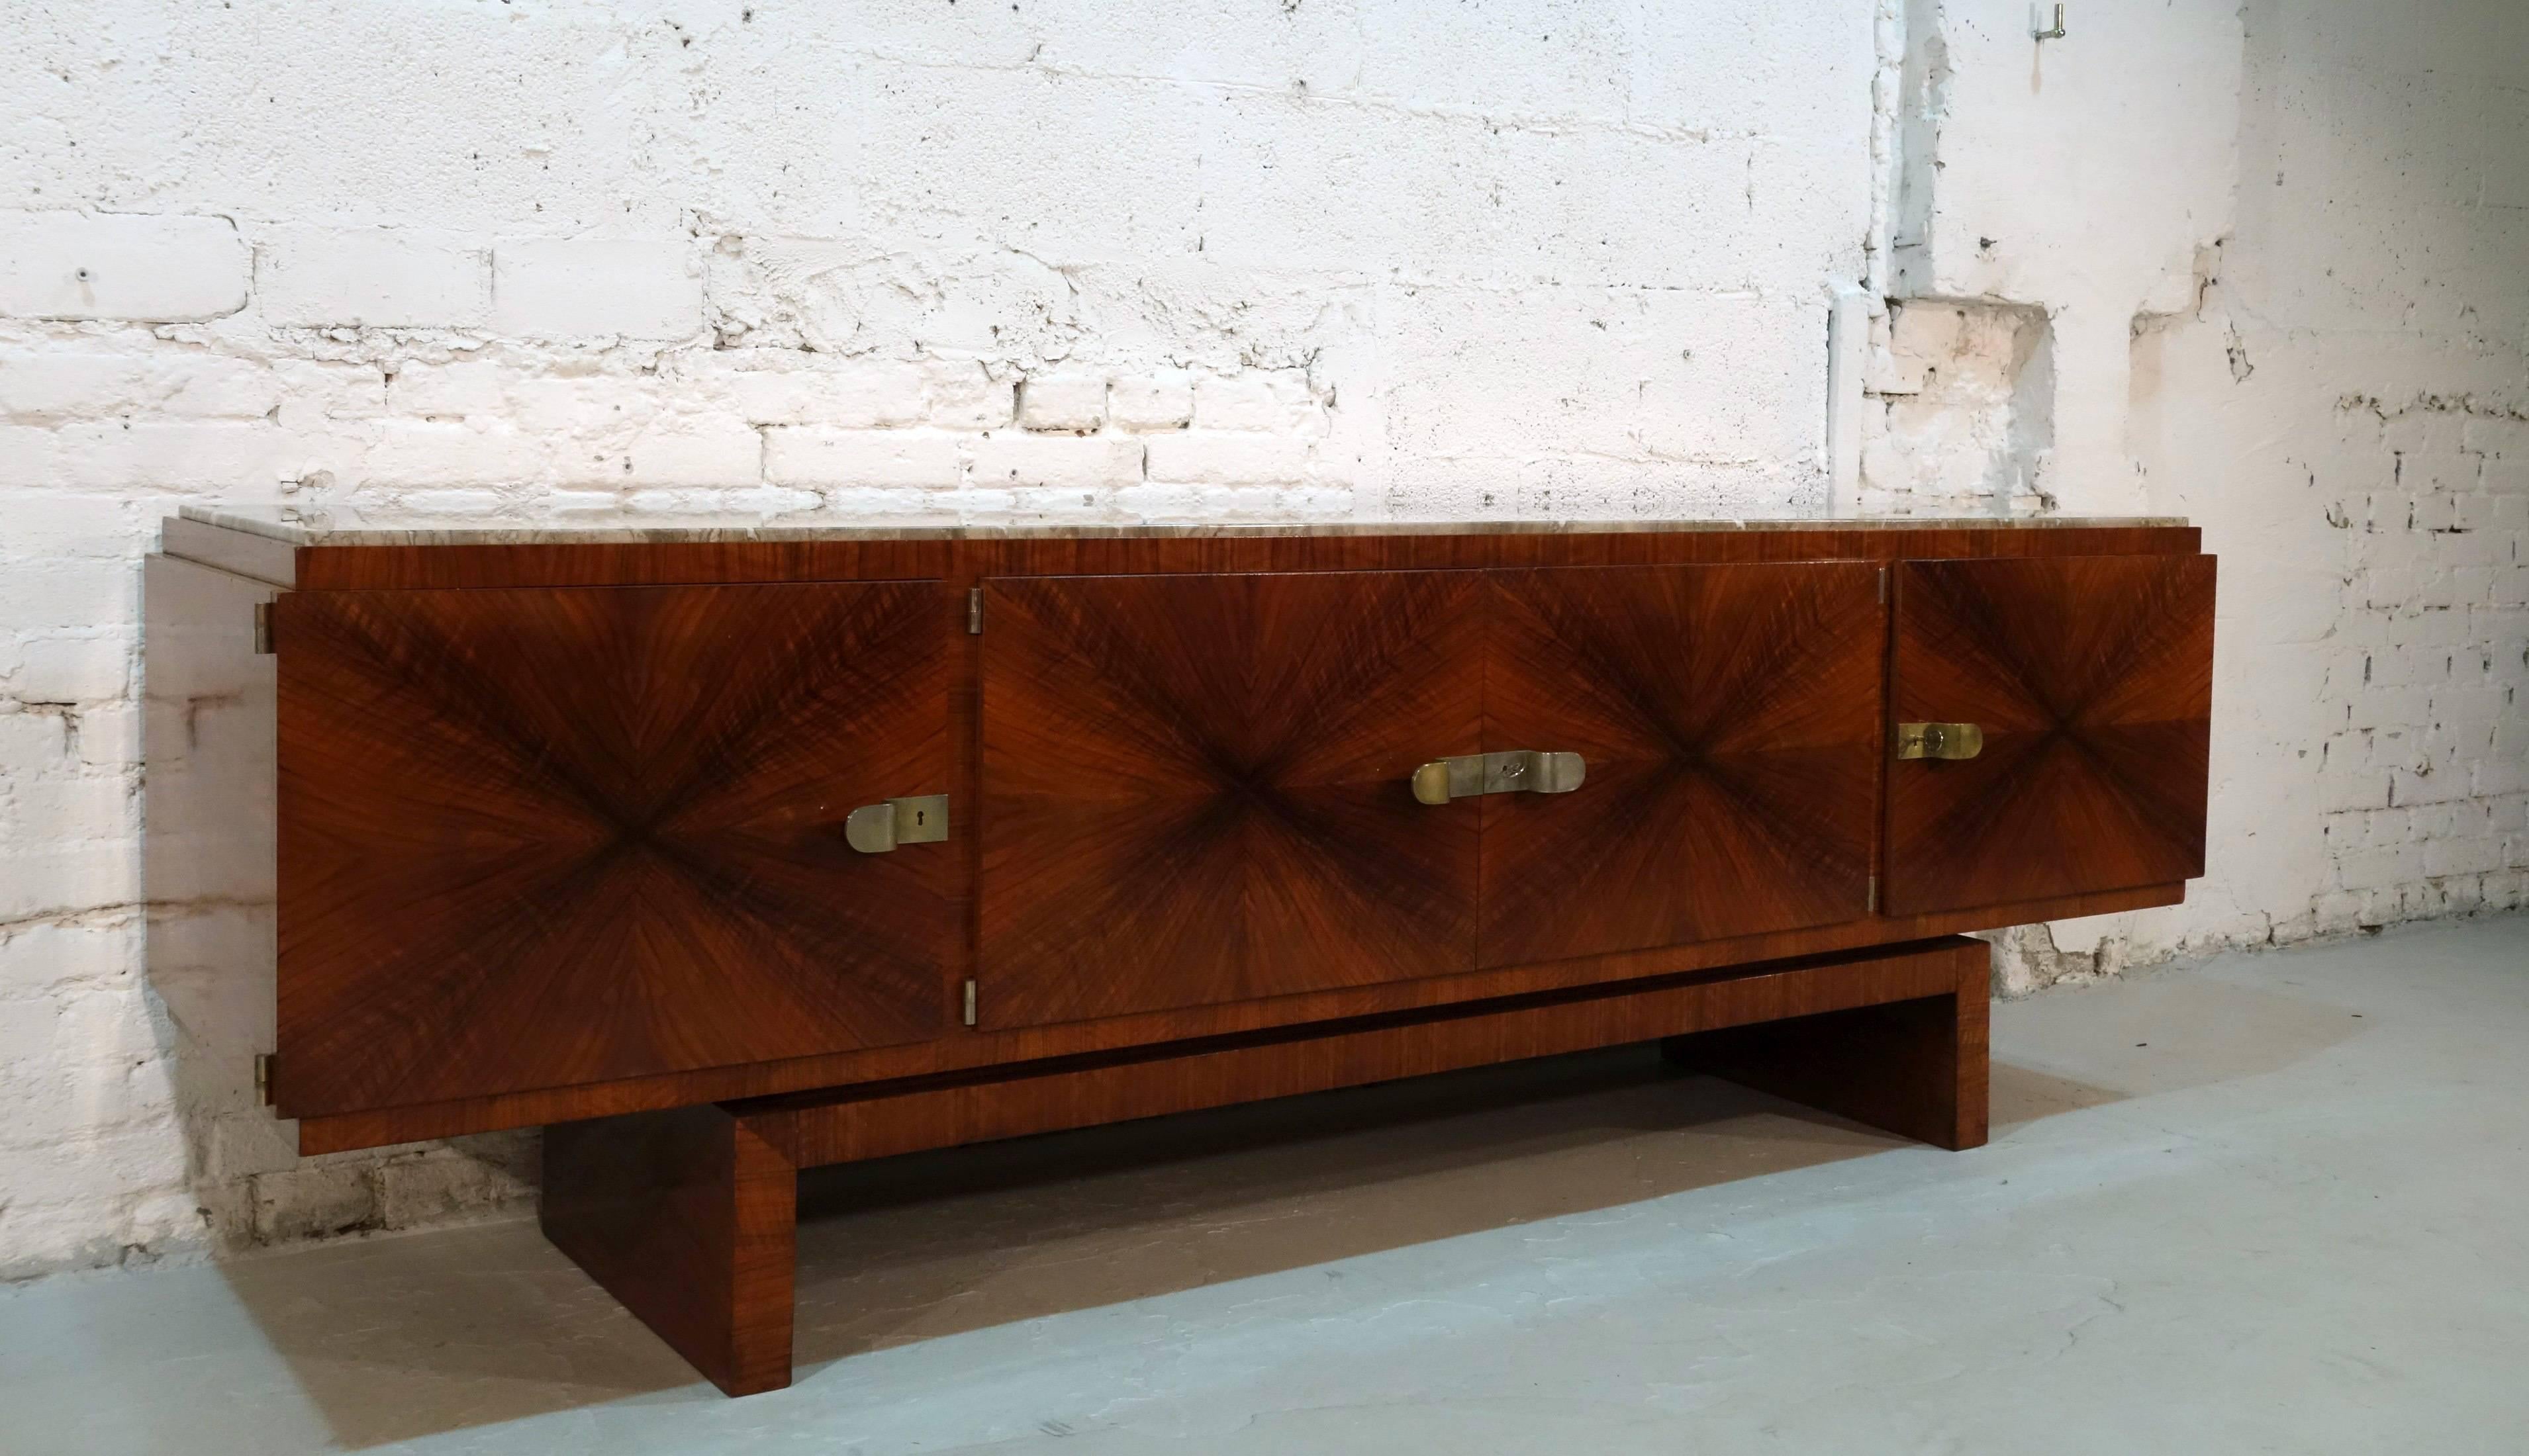 Exemplary sideboard on Asian inspired base of Caucasian walnut with marble top and nickel plated fittings. Executed by Deutsche Werkstätten Hellerau.

The same model also on view at the Museum of Decorative Arts, Berlin.